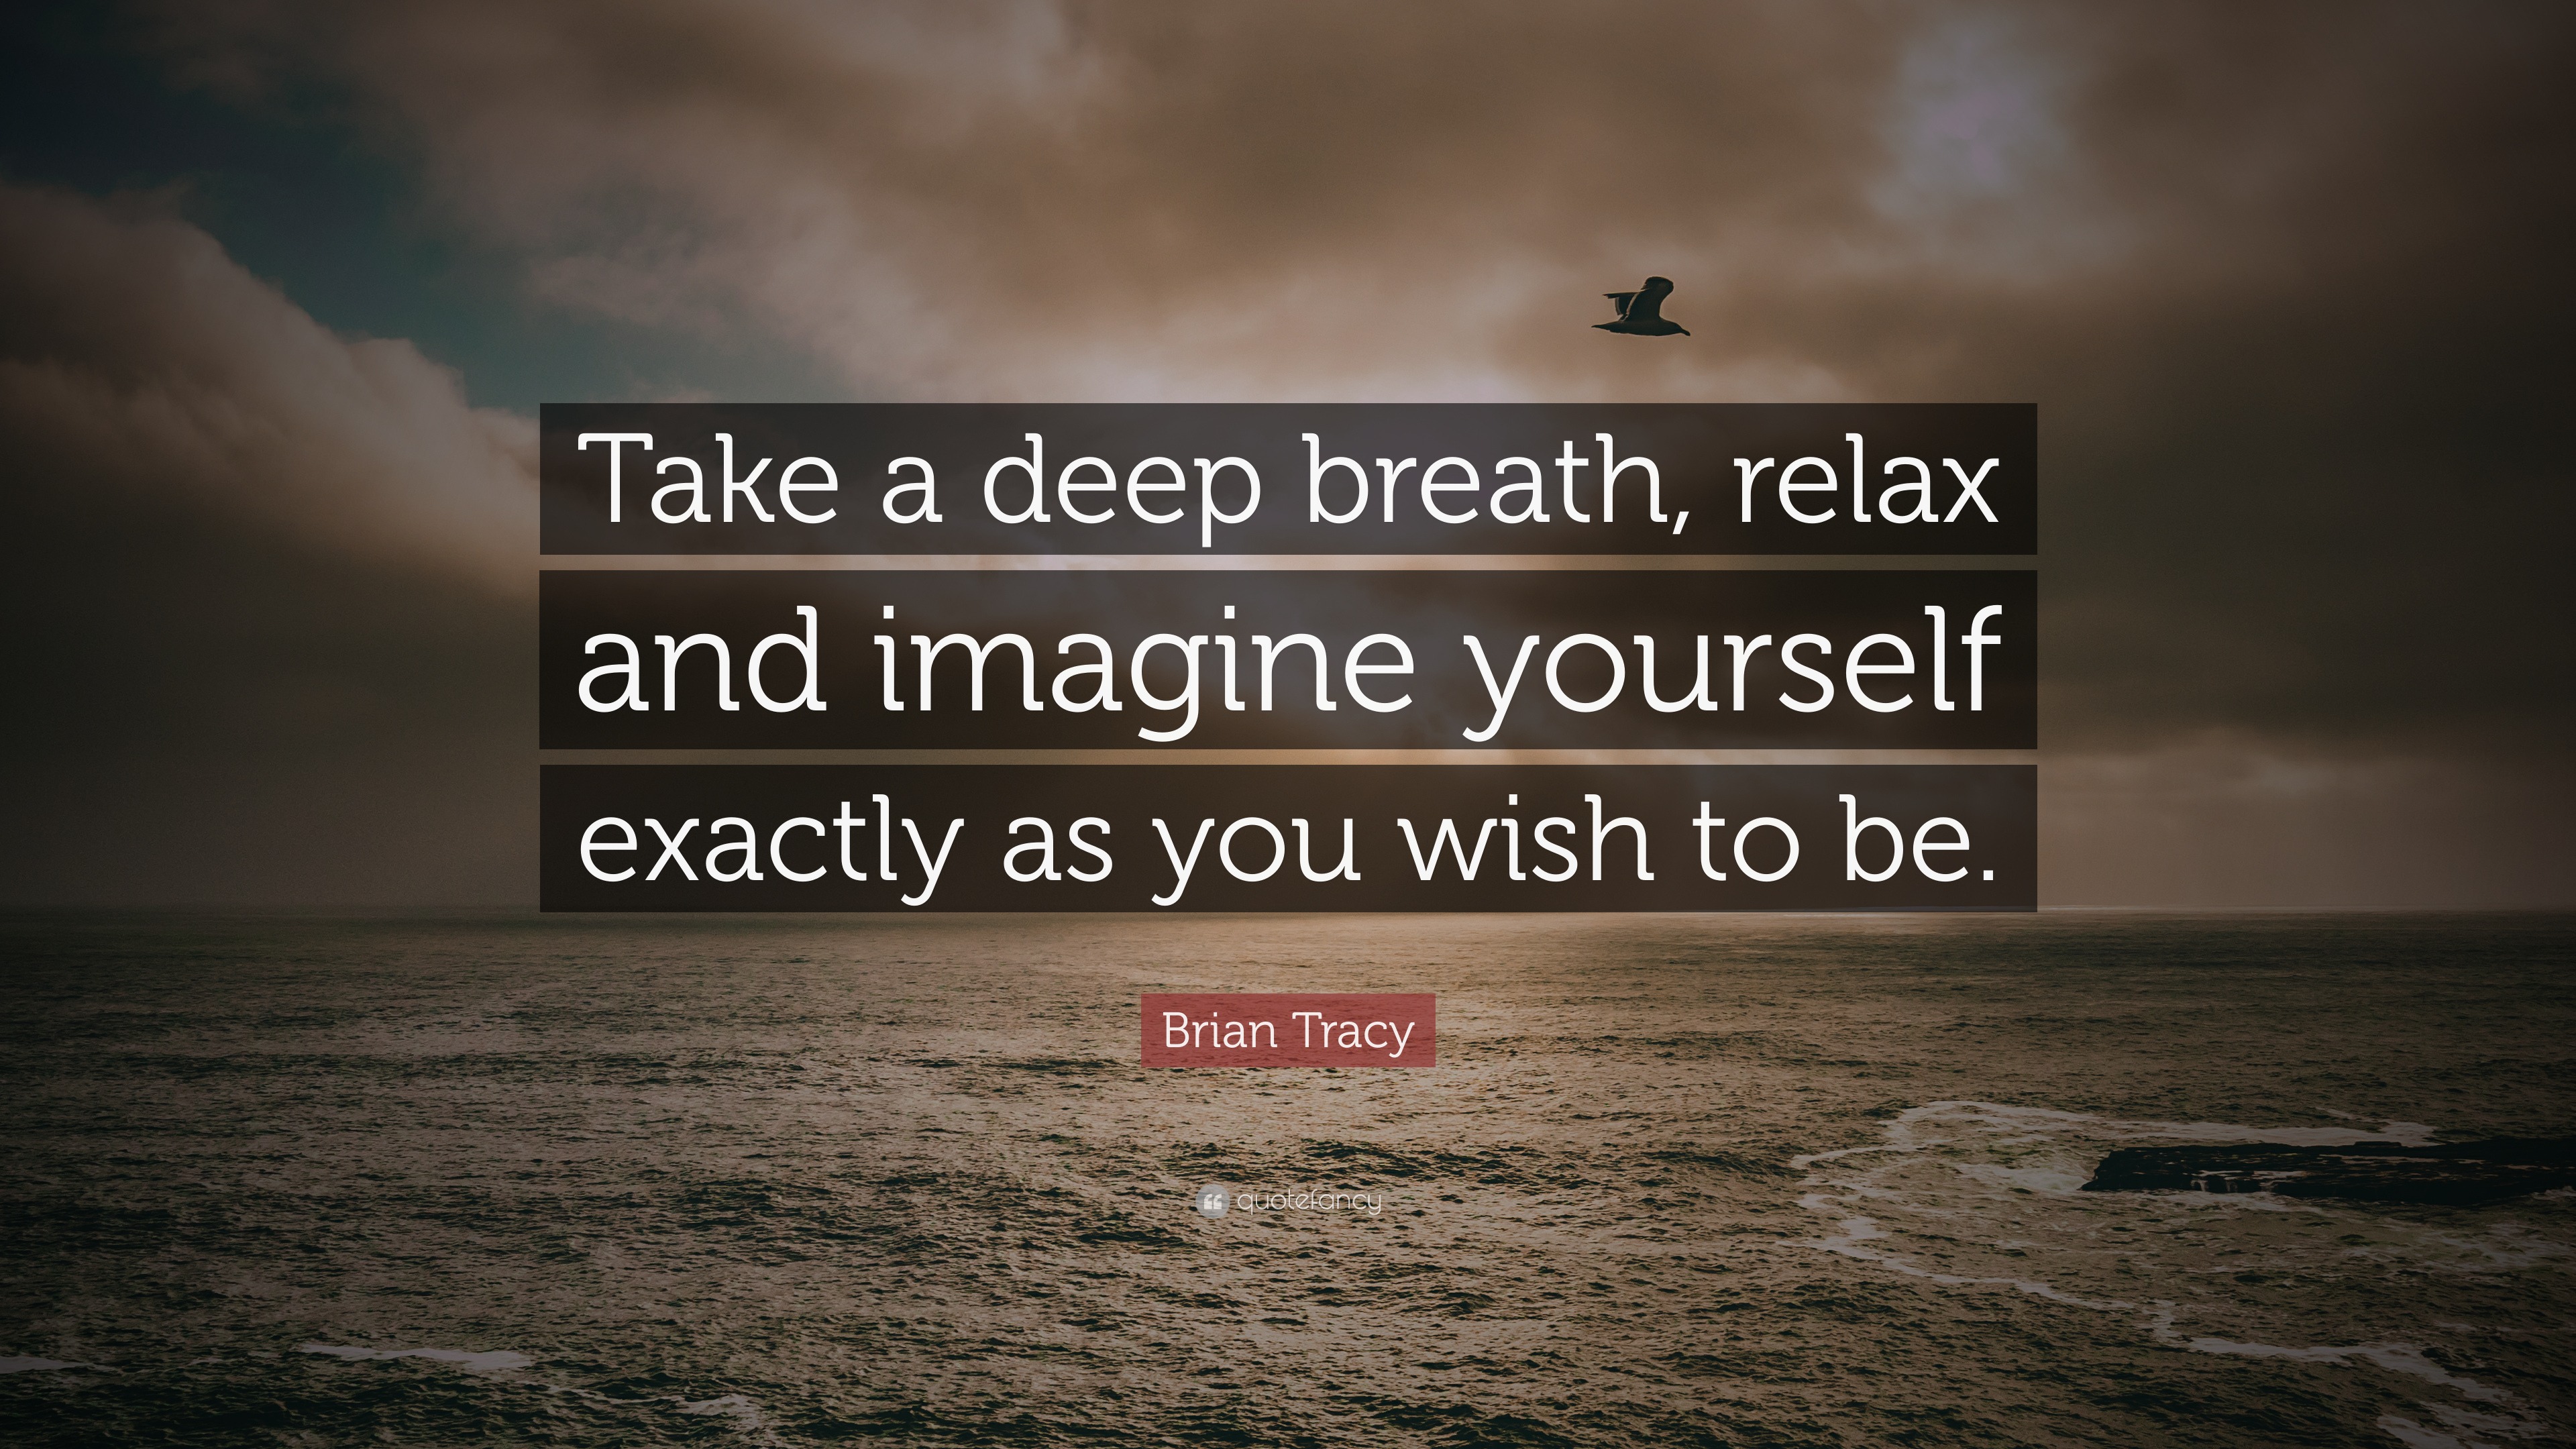 Brian Tracy Quote: “Take a deep breath, relax and imagine yourself